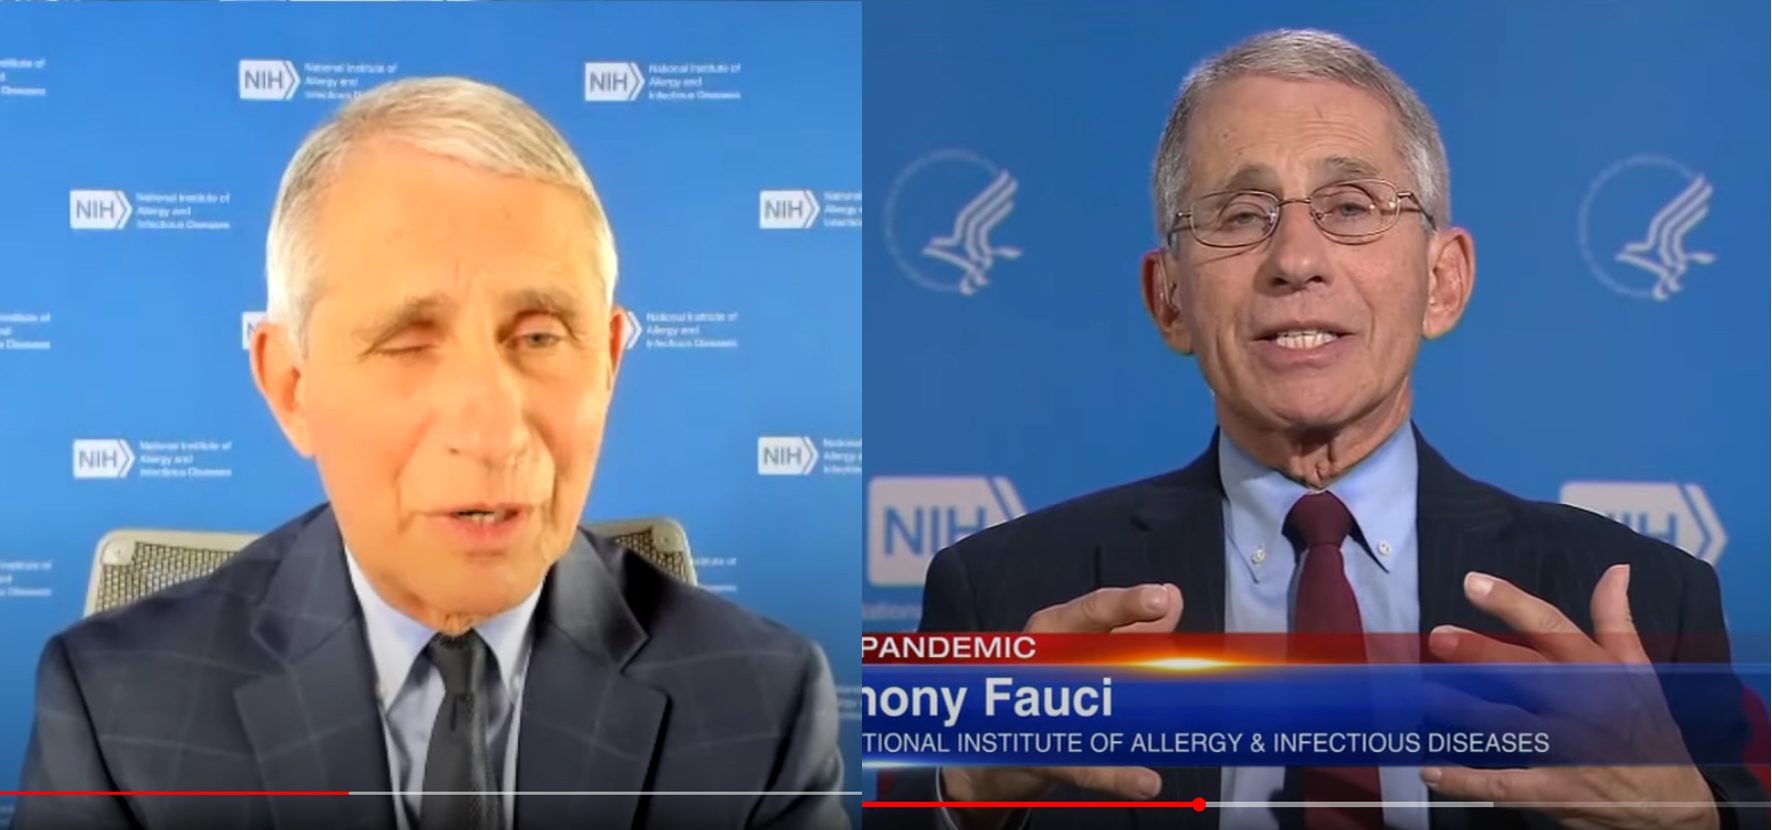 cgi cures fauci039s voice and takes ten years off hunter